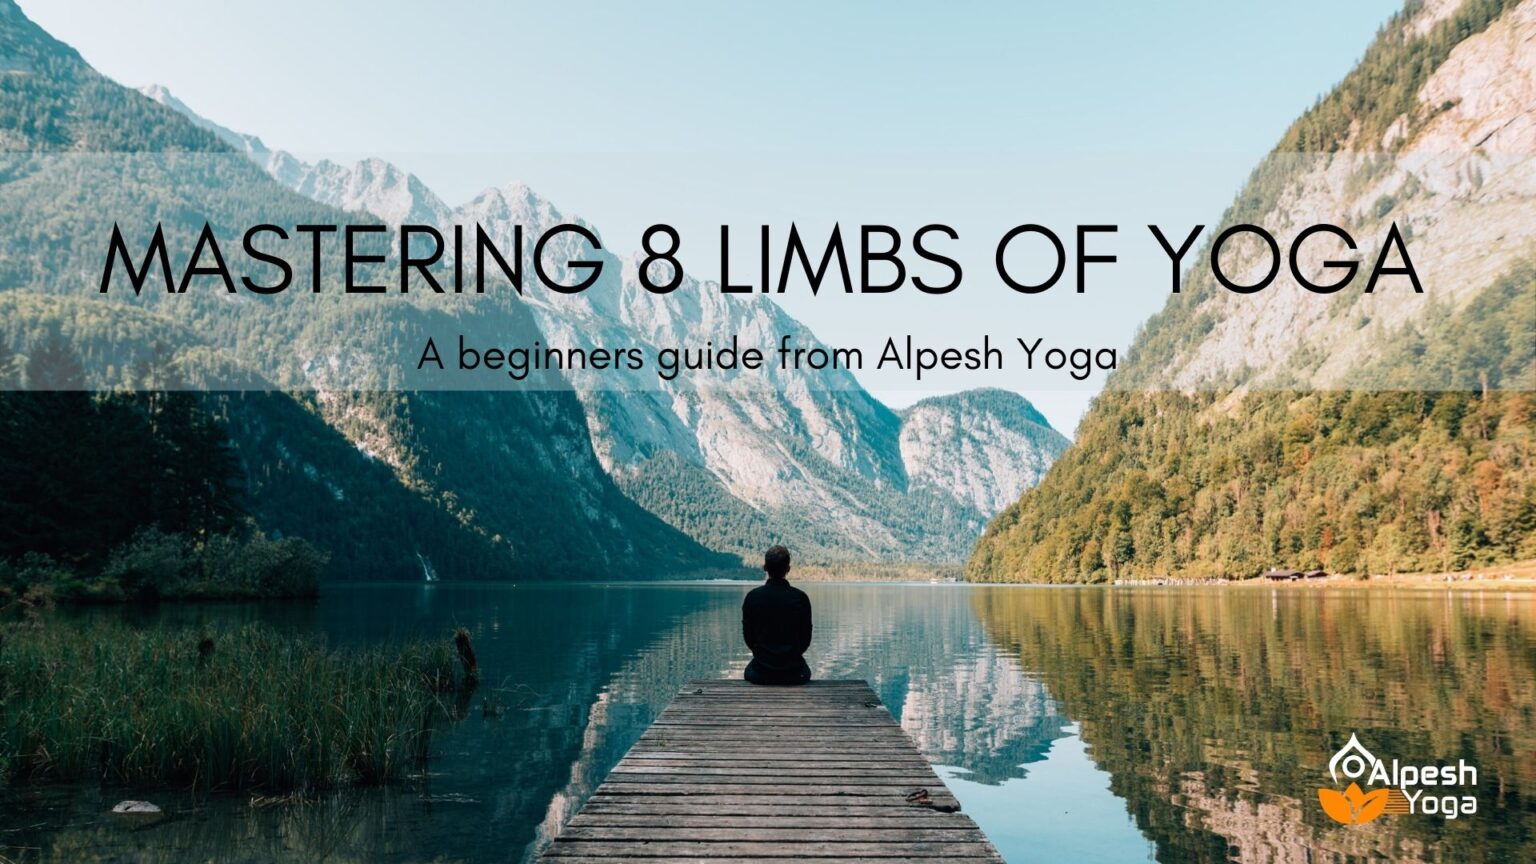 8 limbs of yoga for beginners